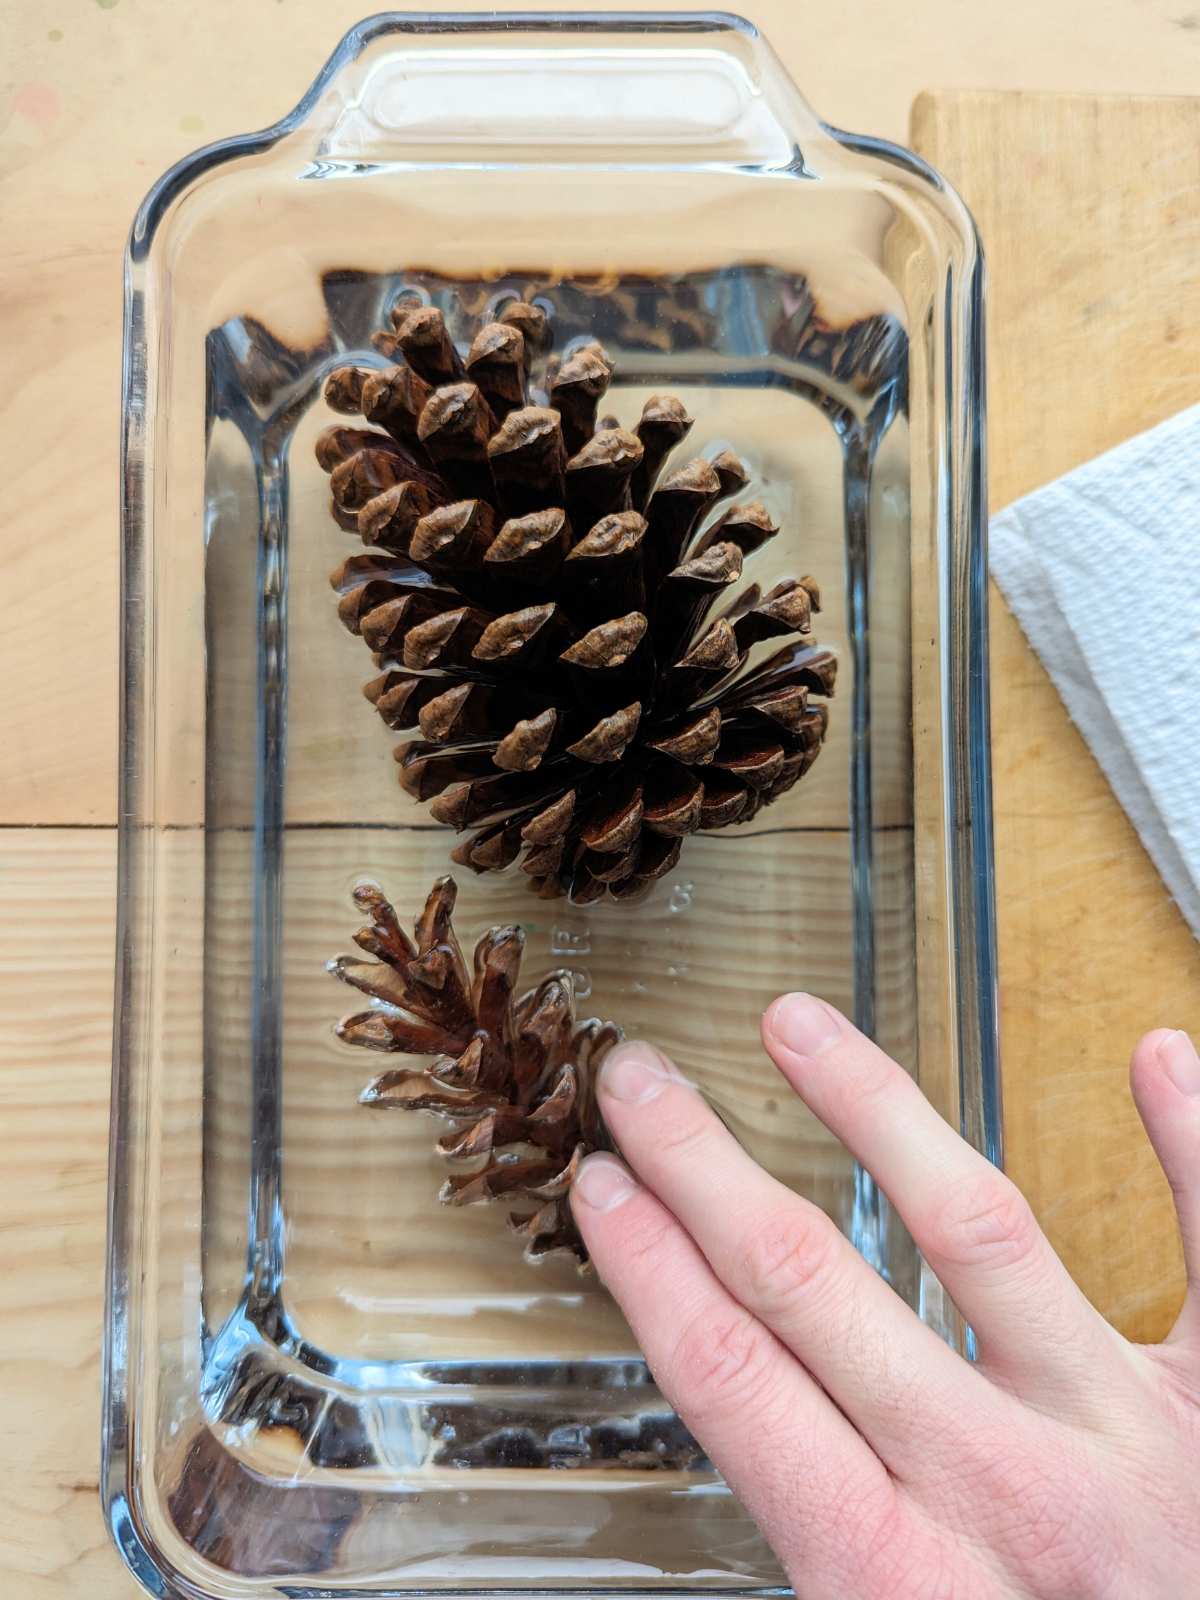 Rectangular glass dish filled with water and two pinecones, one large and one small. A hand pressing down on the smaller pinecone into the water. Wooden surface with a white paper towel on the right.